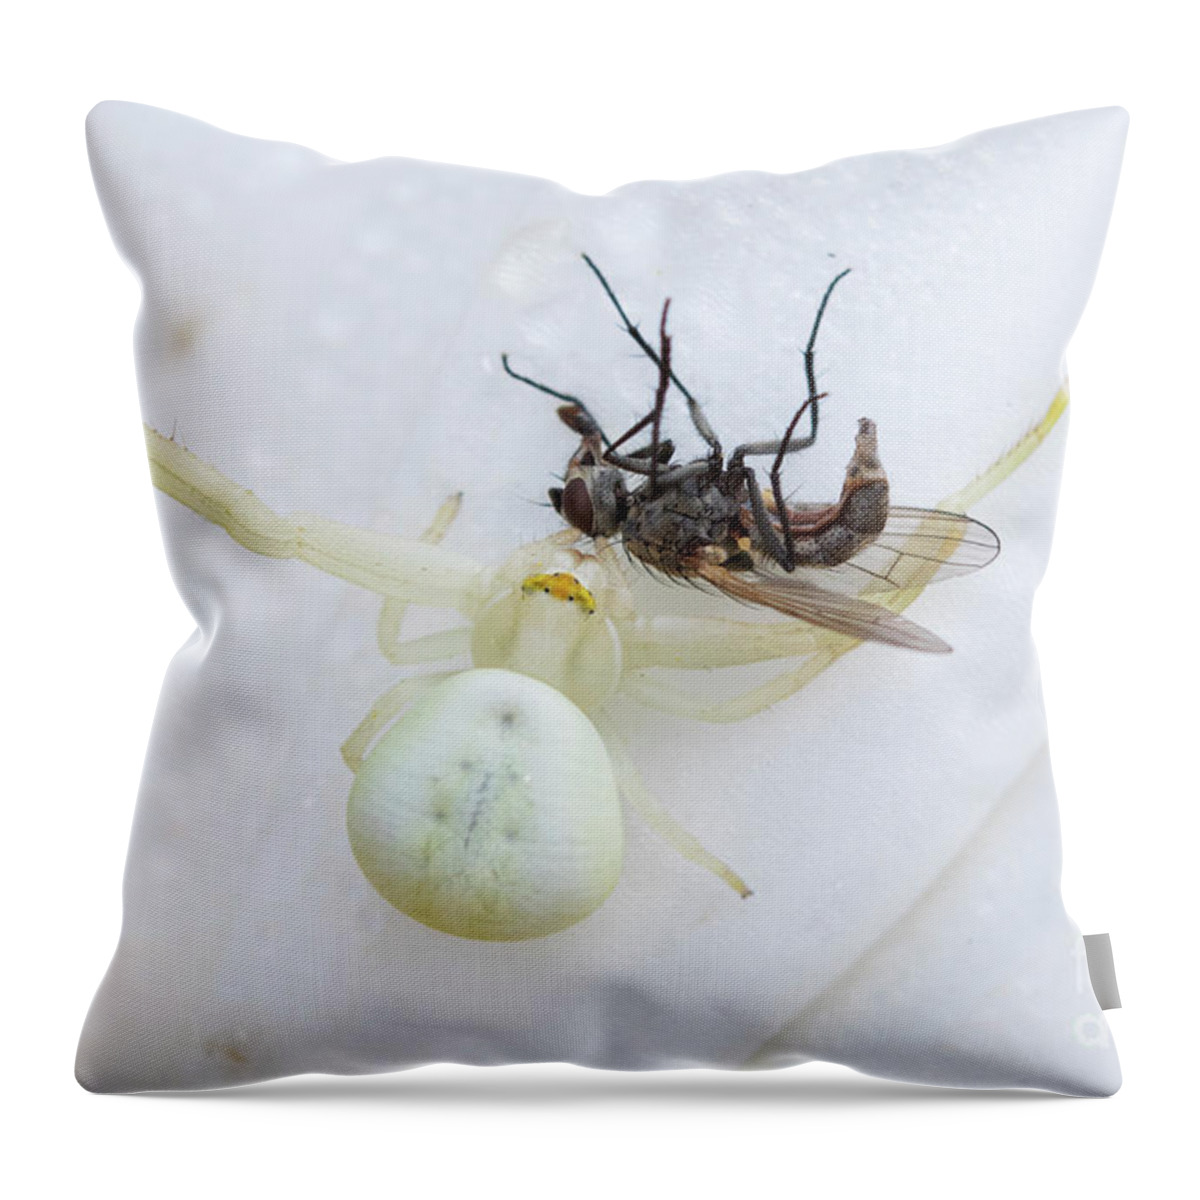 The White Killer Throw Pillow featuring the photograph The White Killer by Mircea Costina Photography